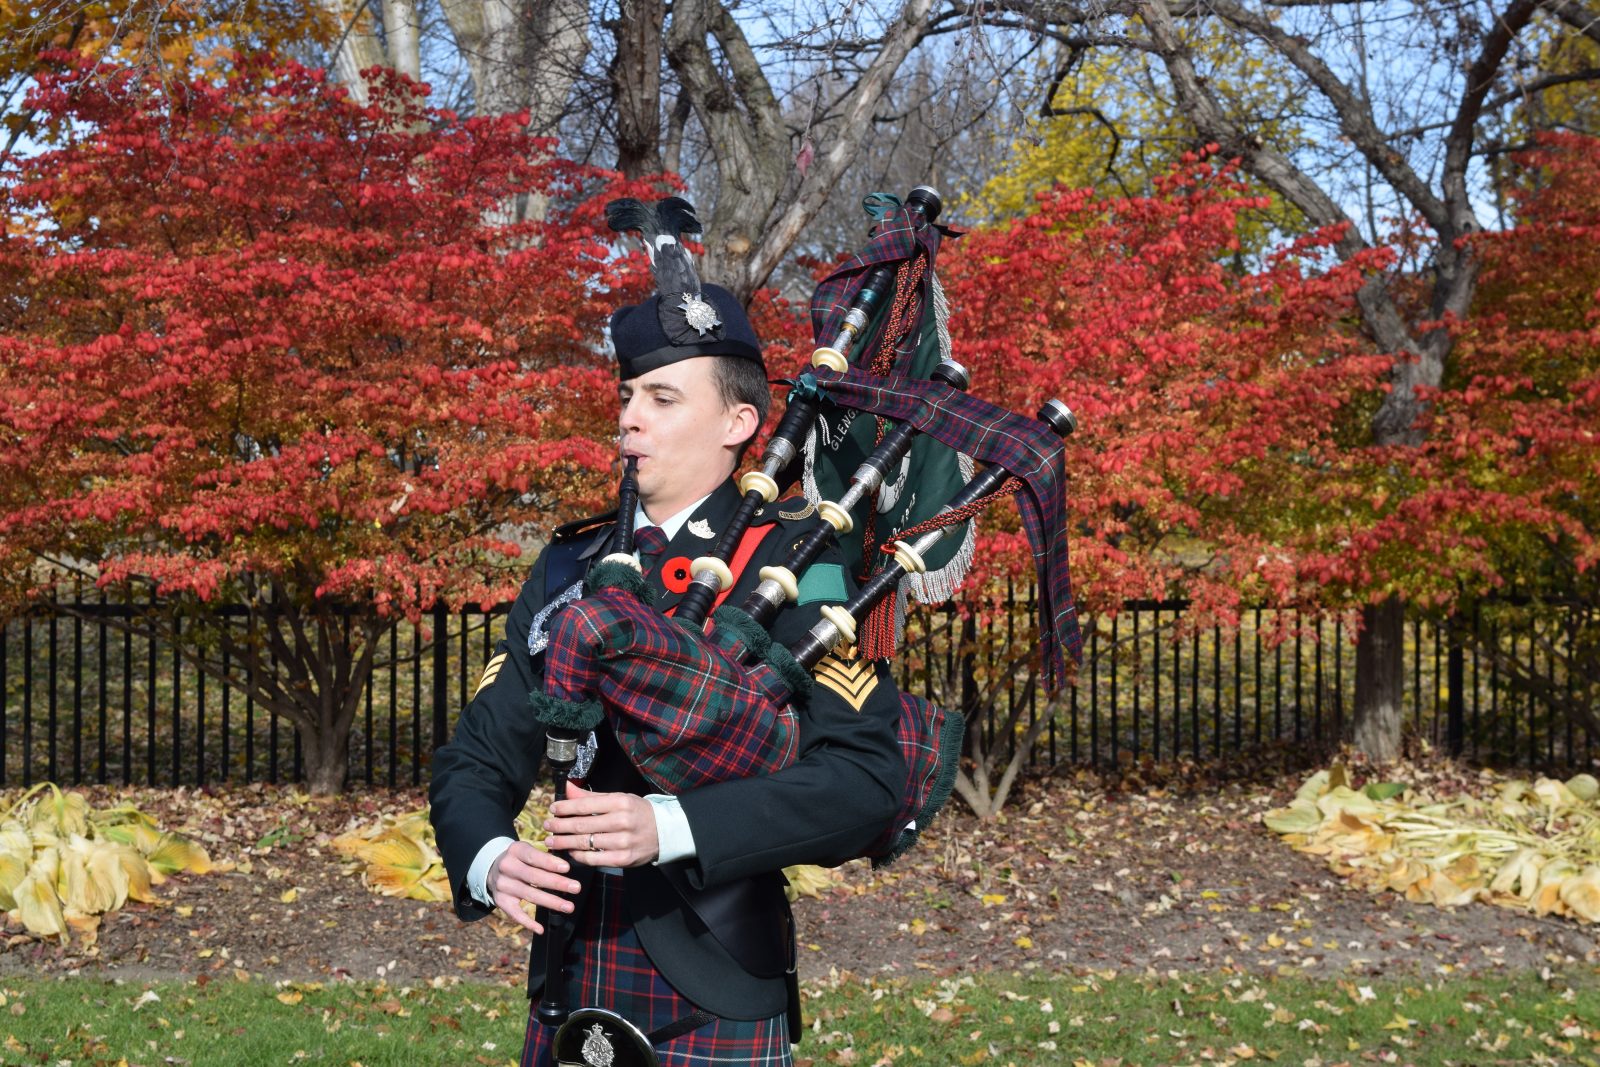 SLIDESHOW: Remembrance Day 2021